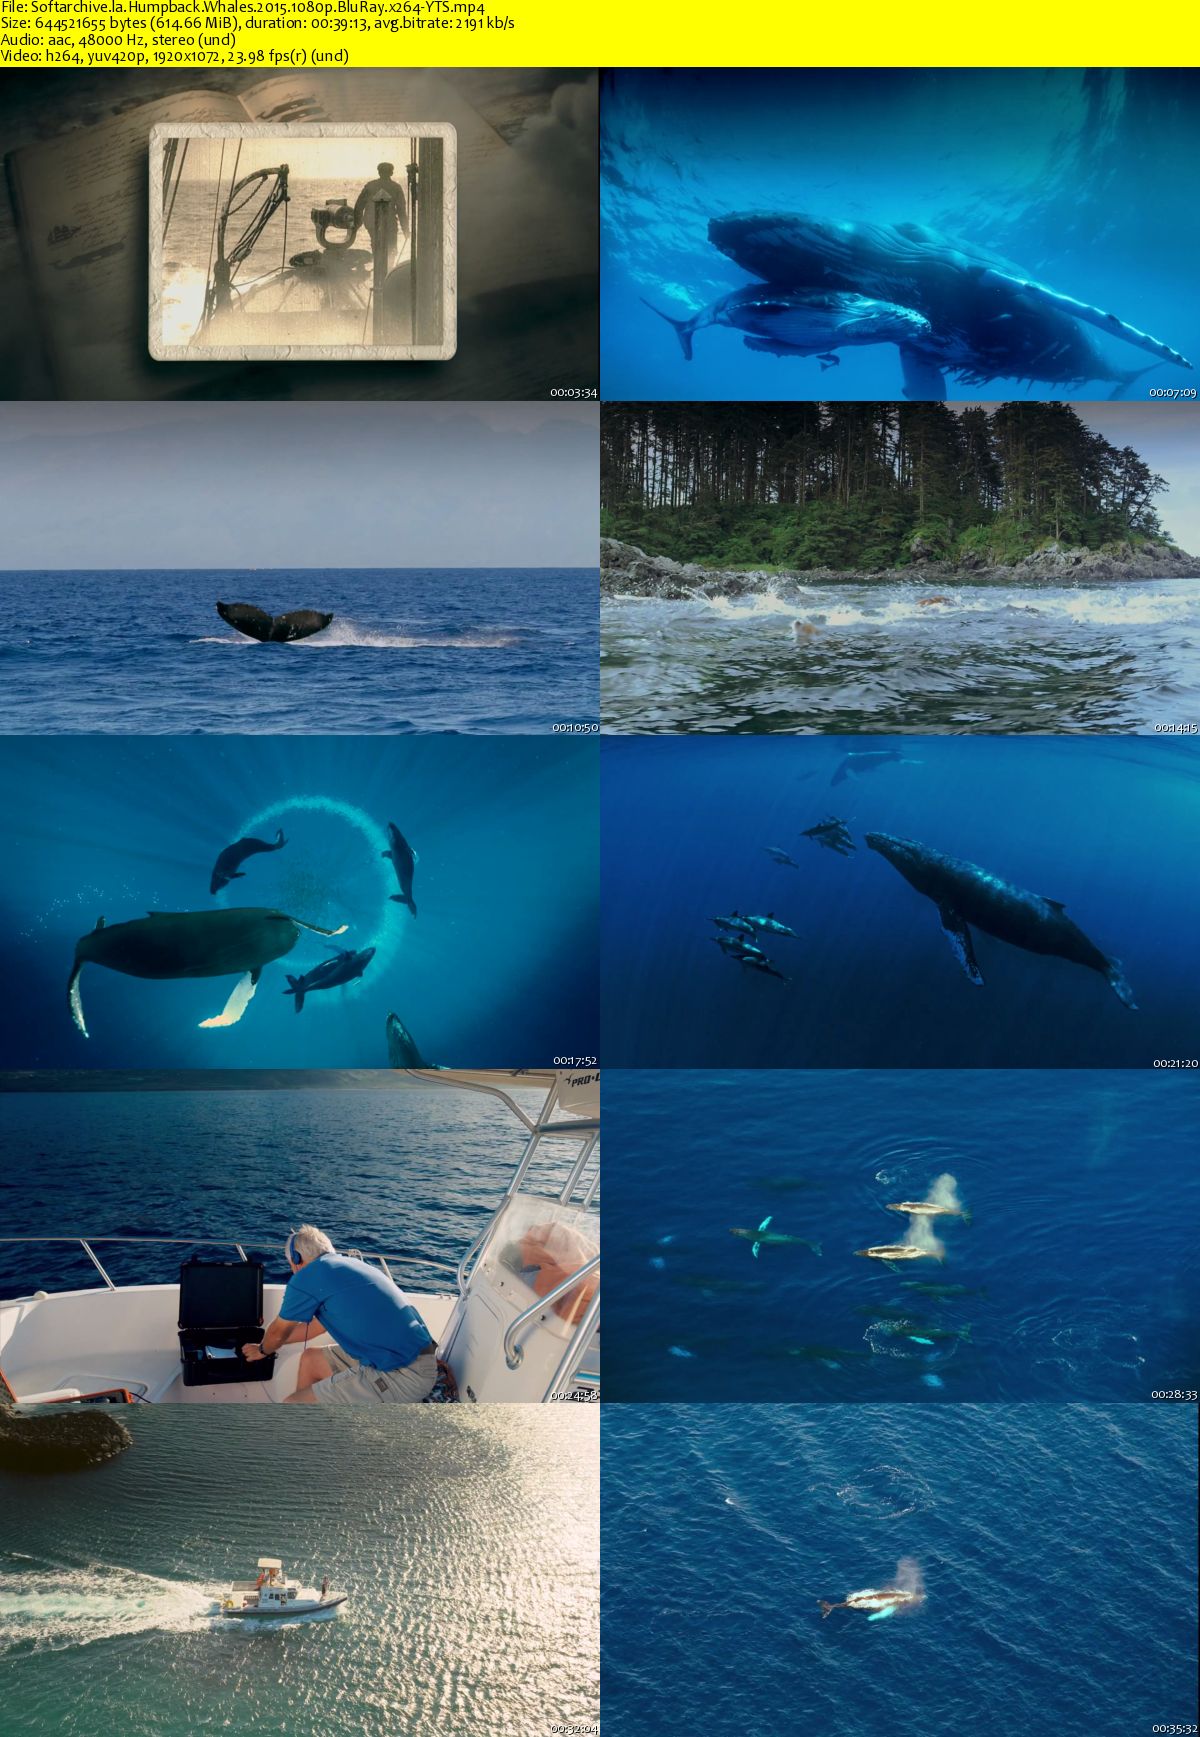 Download Humpback Whales 2015 1080p Bluray X264 Yts Softarchive